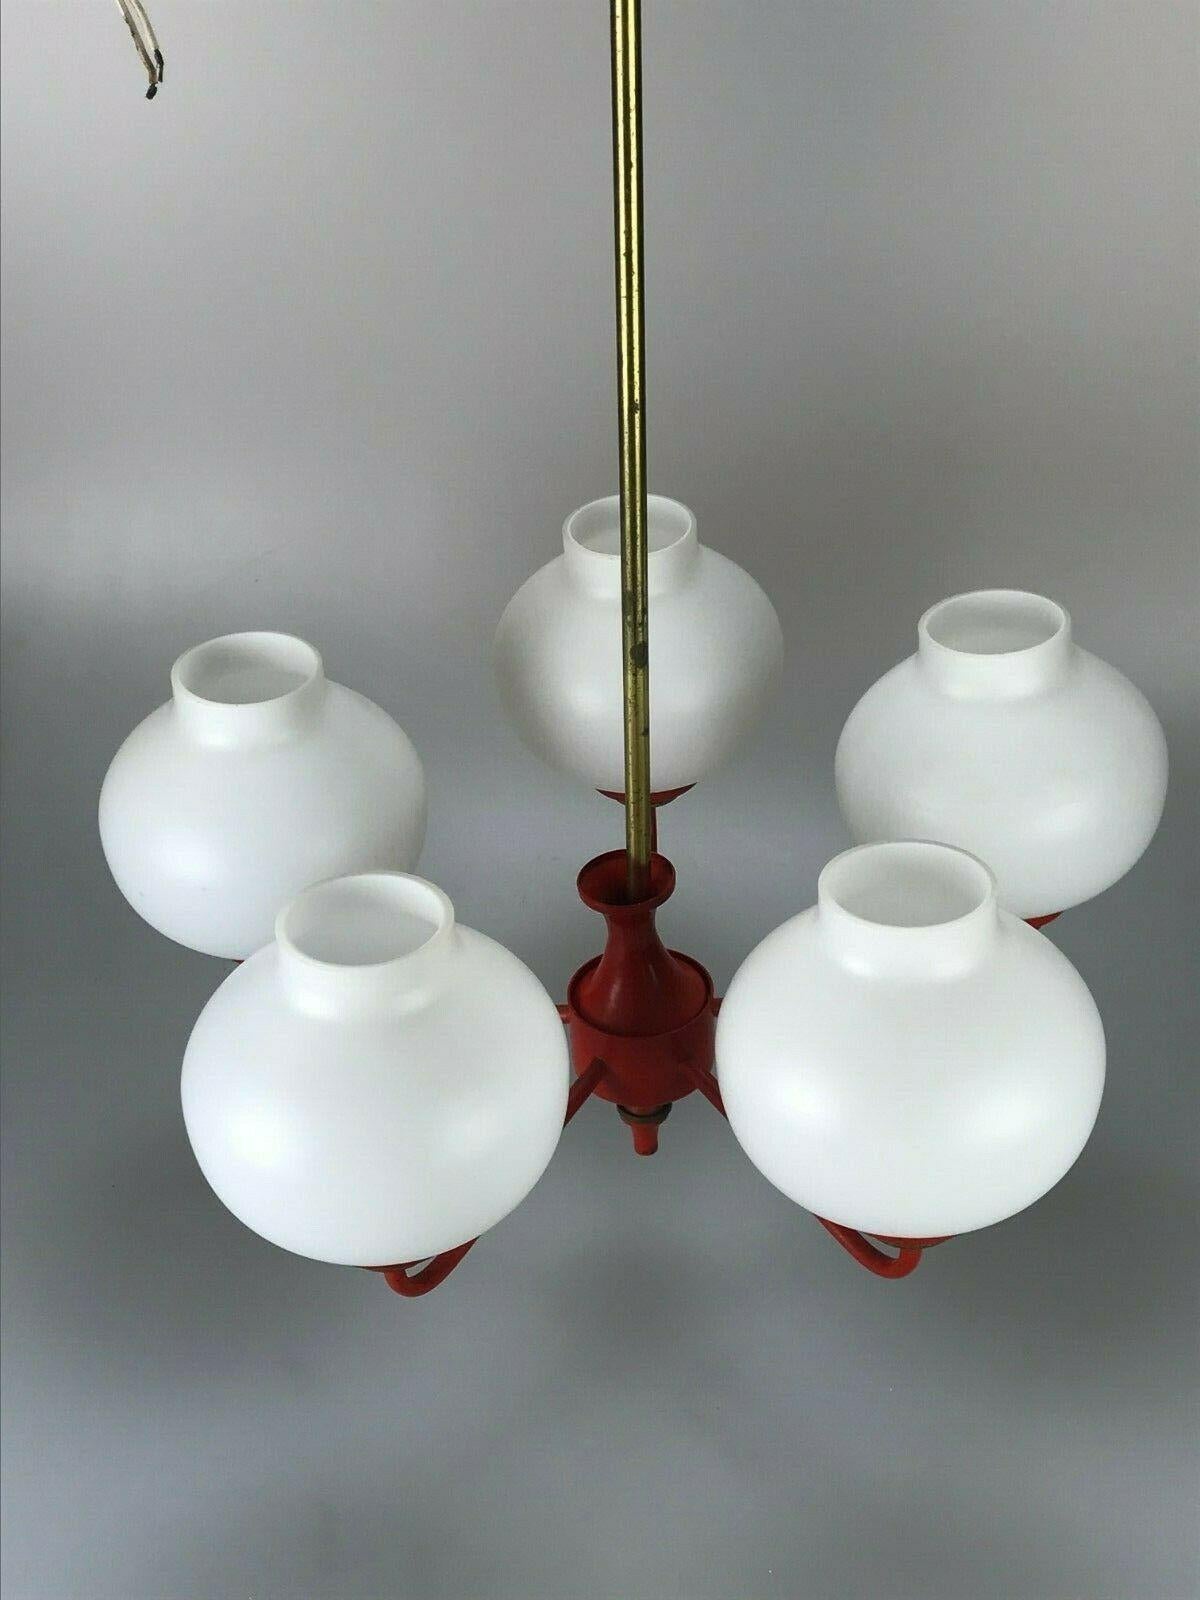 German 70s Lamp Light Ceiling Lamp Chandelier Ball Lamp Space Age Design For Sale